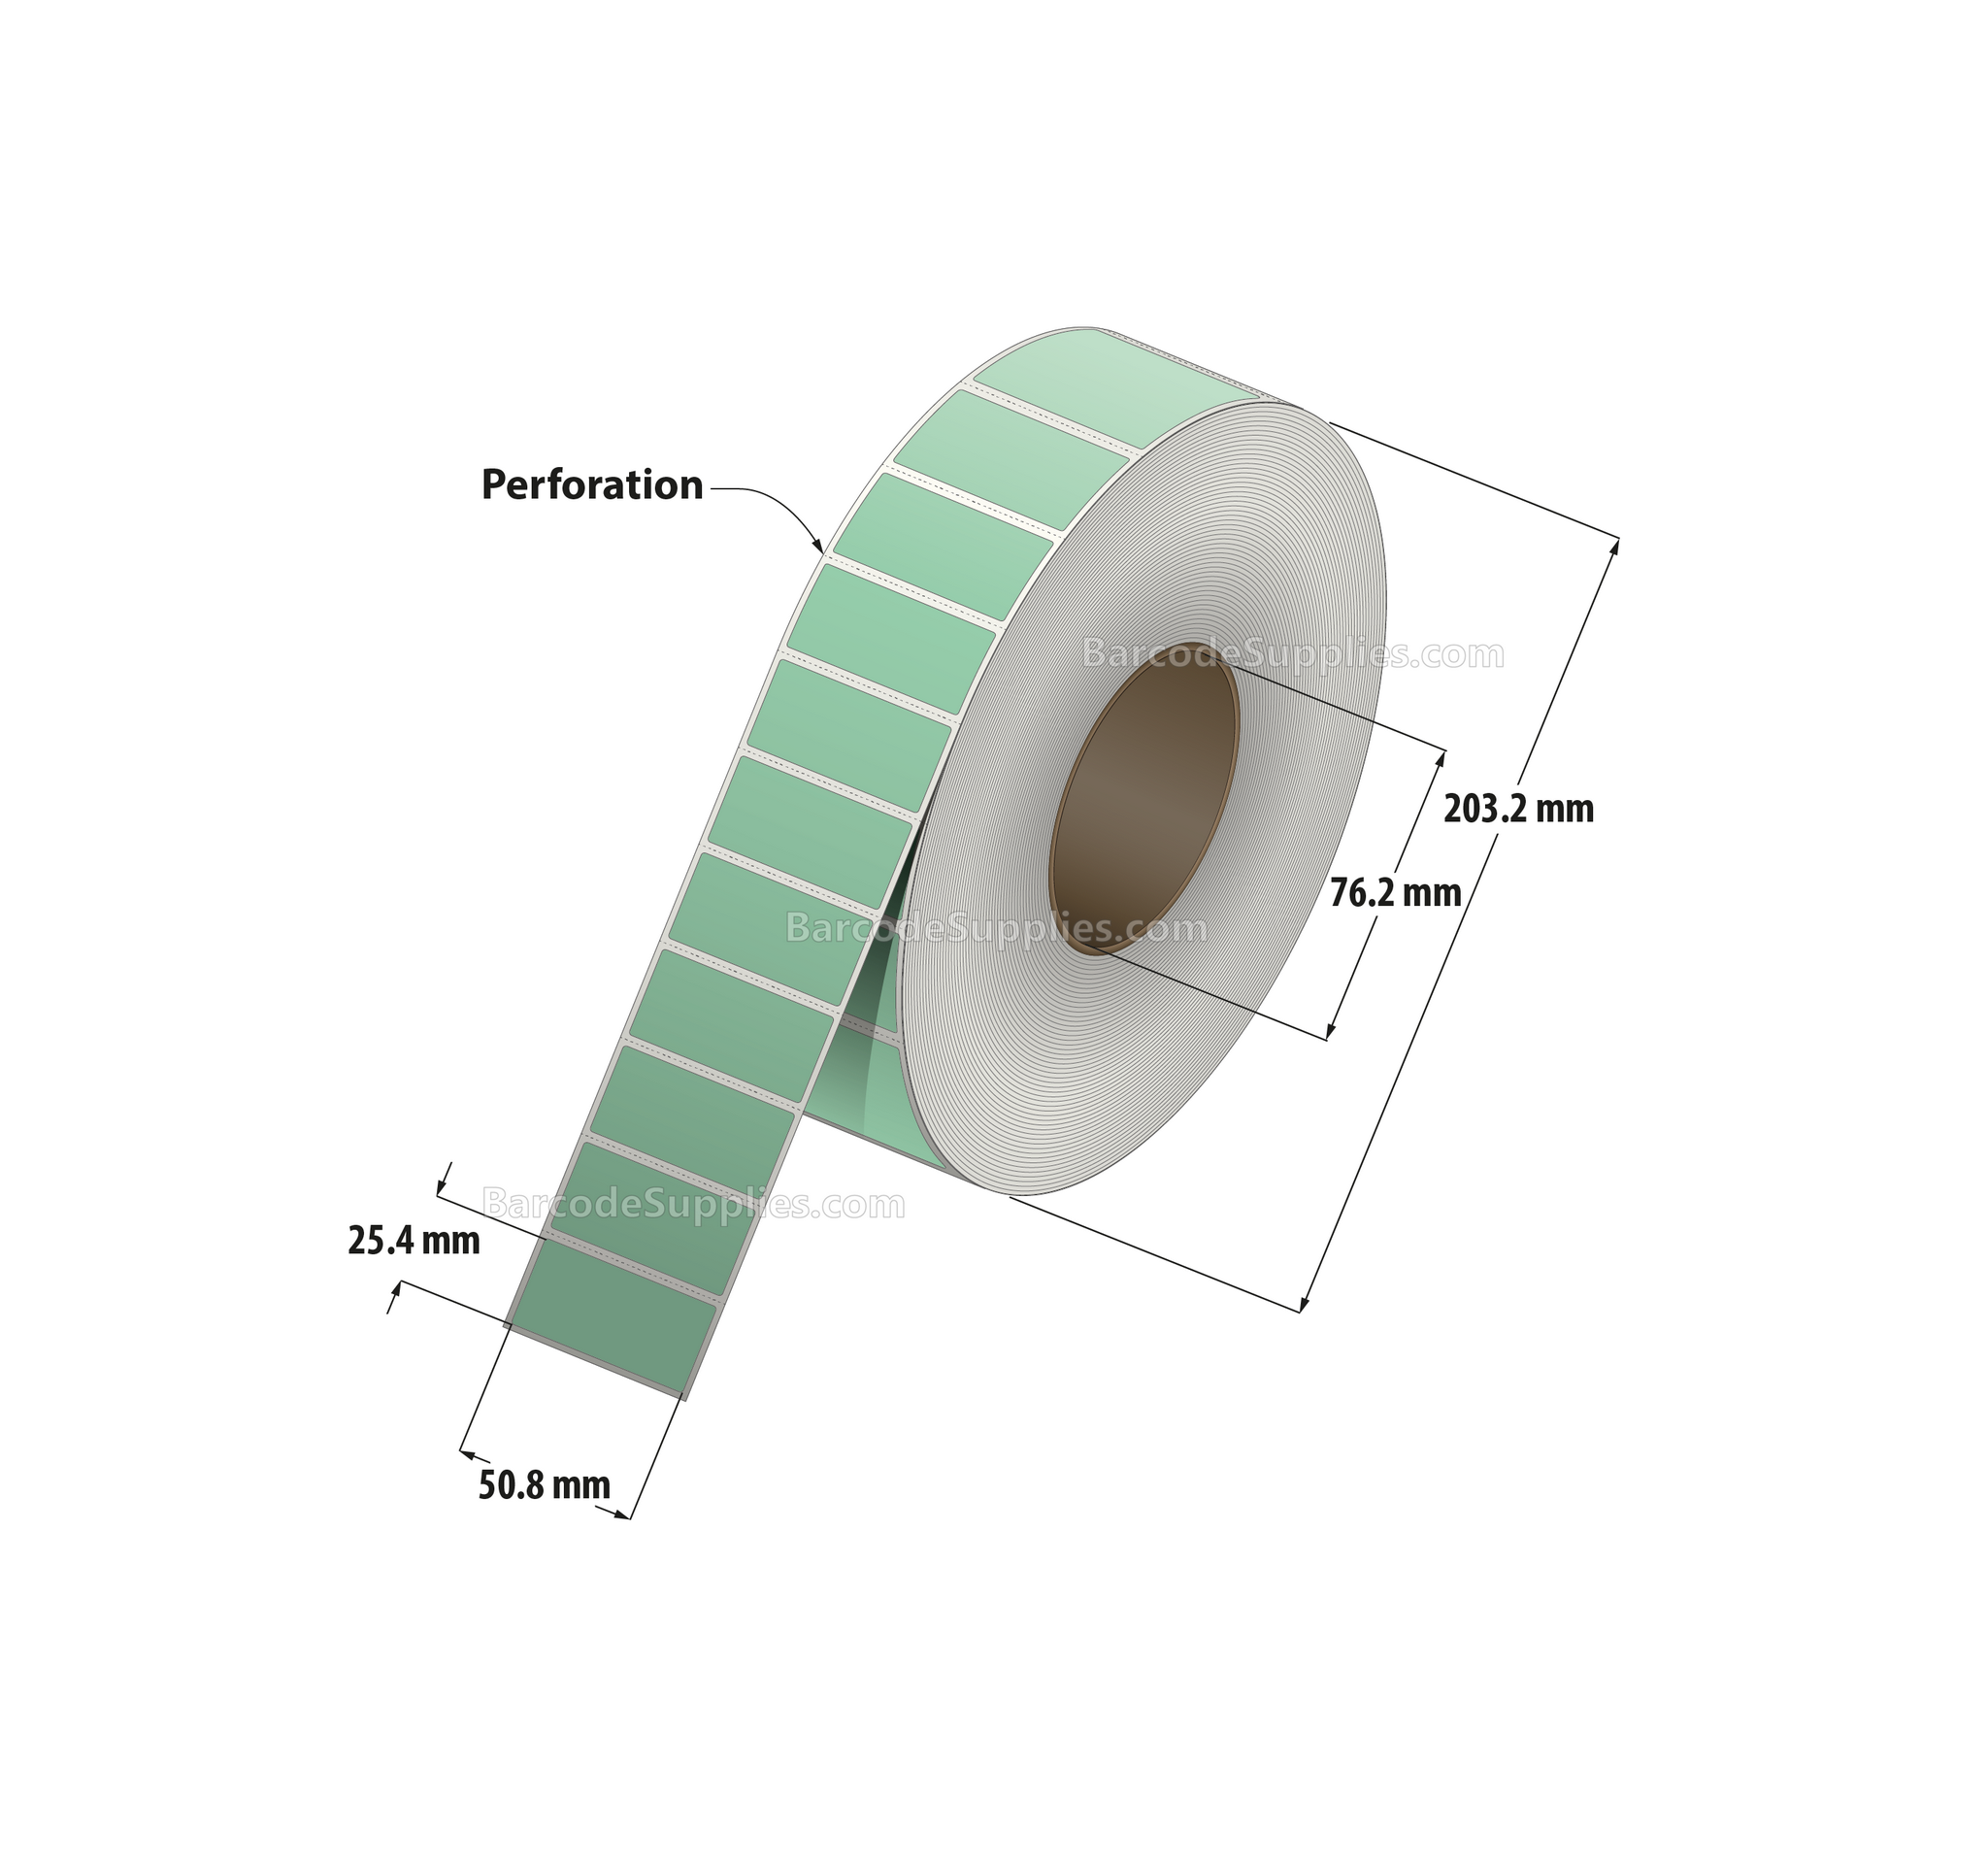 2 x 1 Thermal Transfer 345 Green Labels With Permanent Adhesive - Perforated - 5500 Labels Per Roll - Carton Of 8 Rolls - 44000 Labels Total - MPN: RFC-2-1-5500-GR